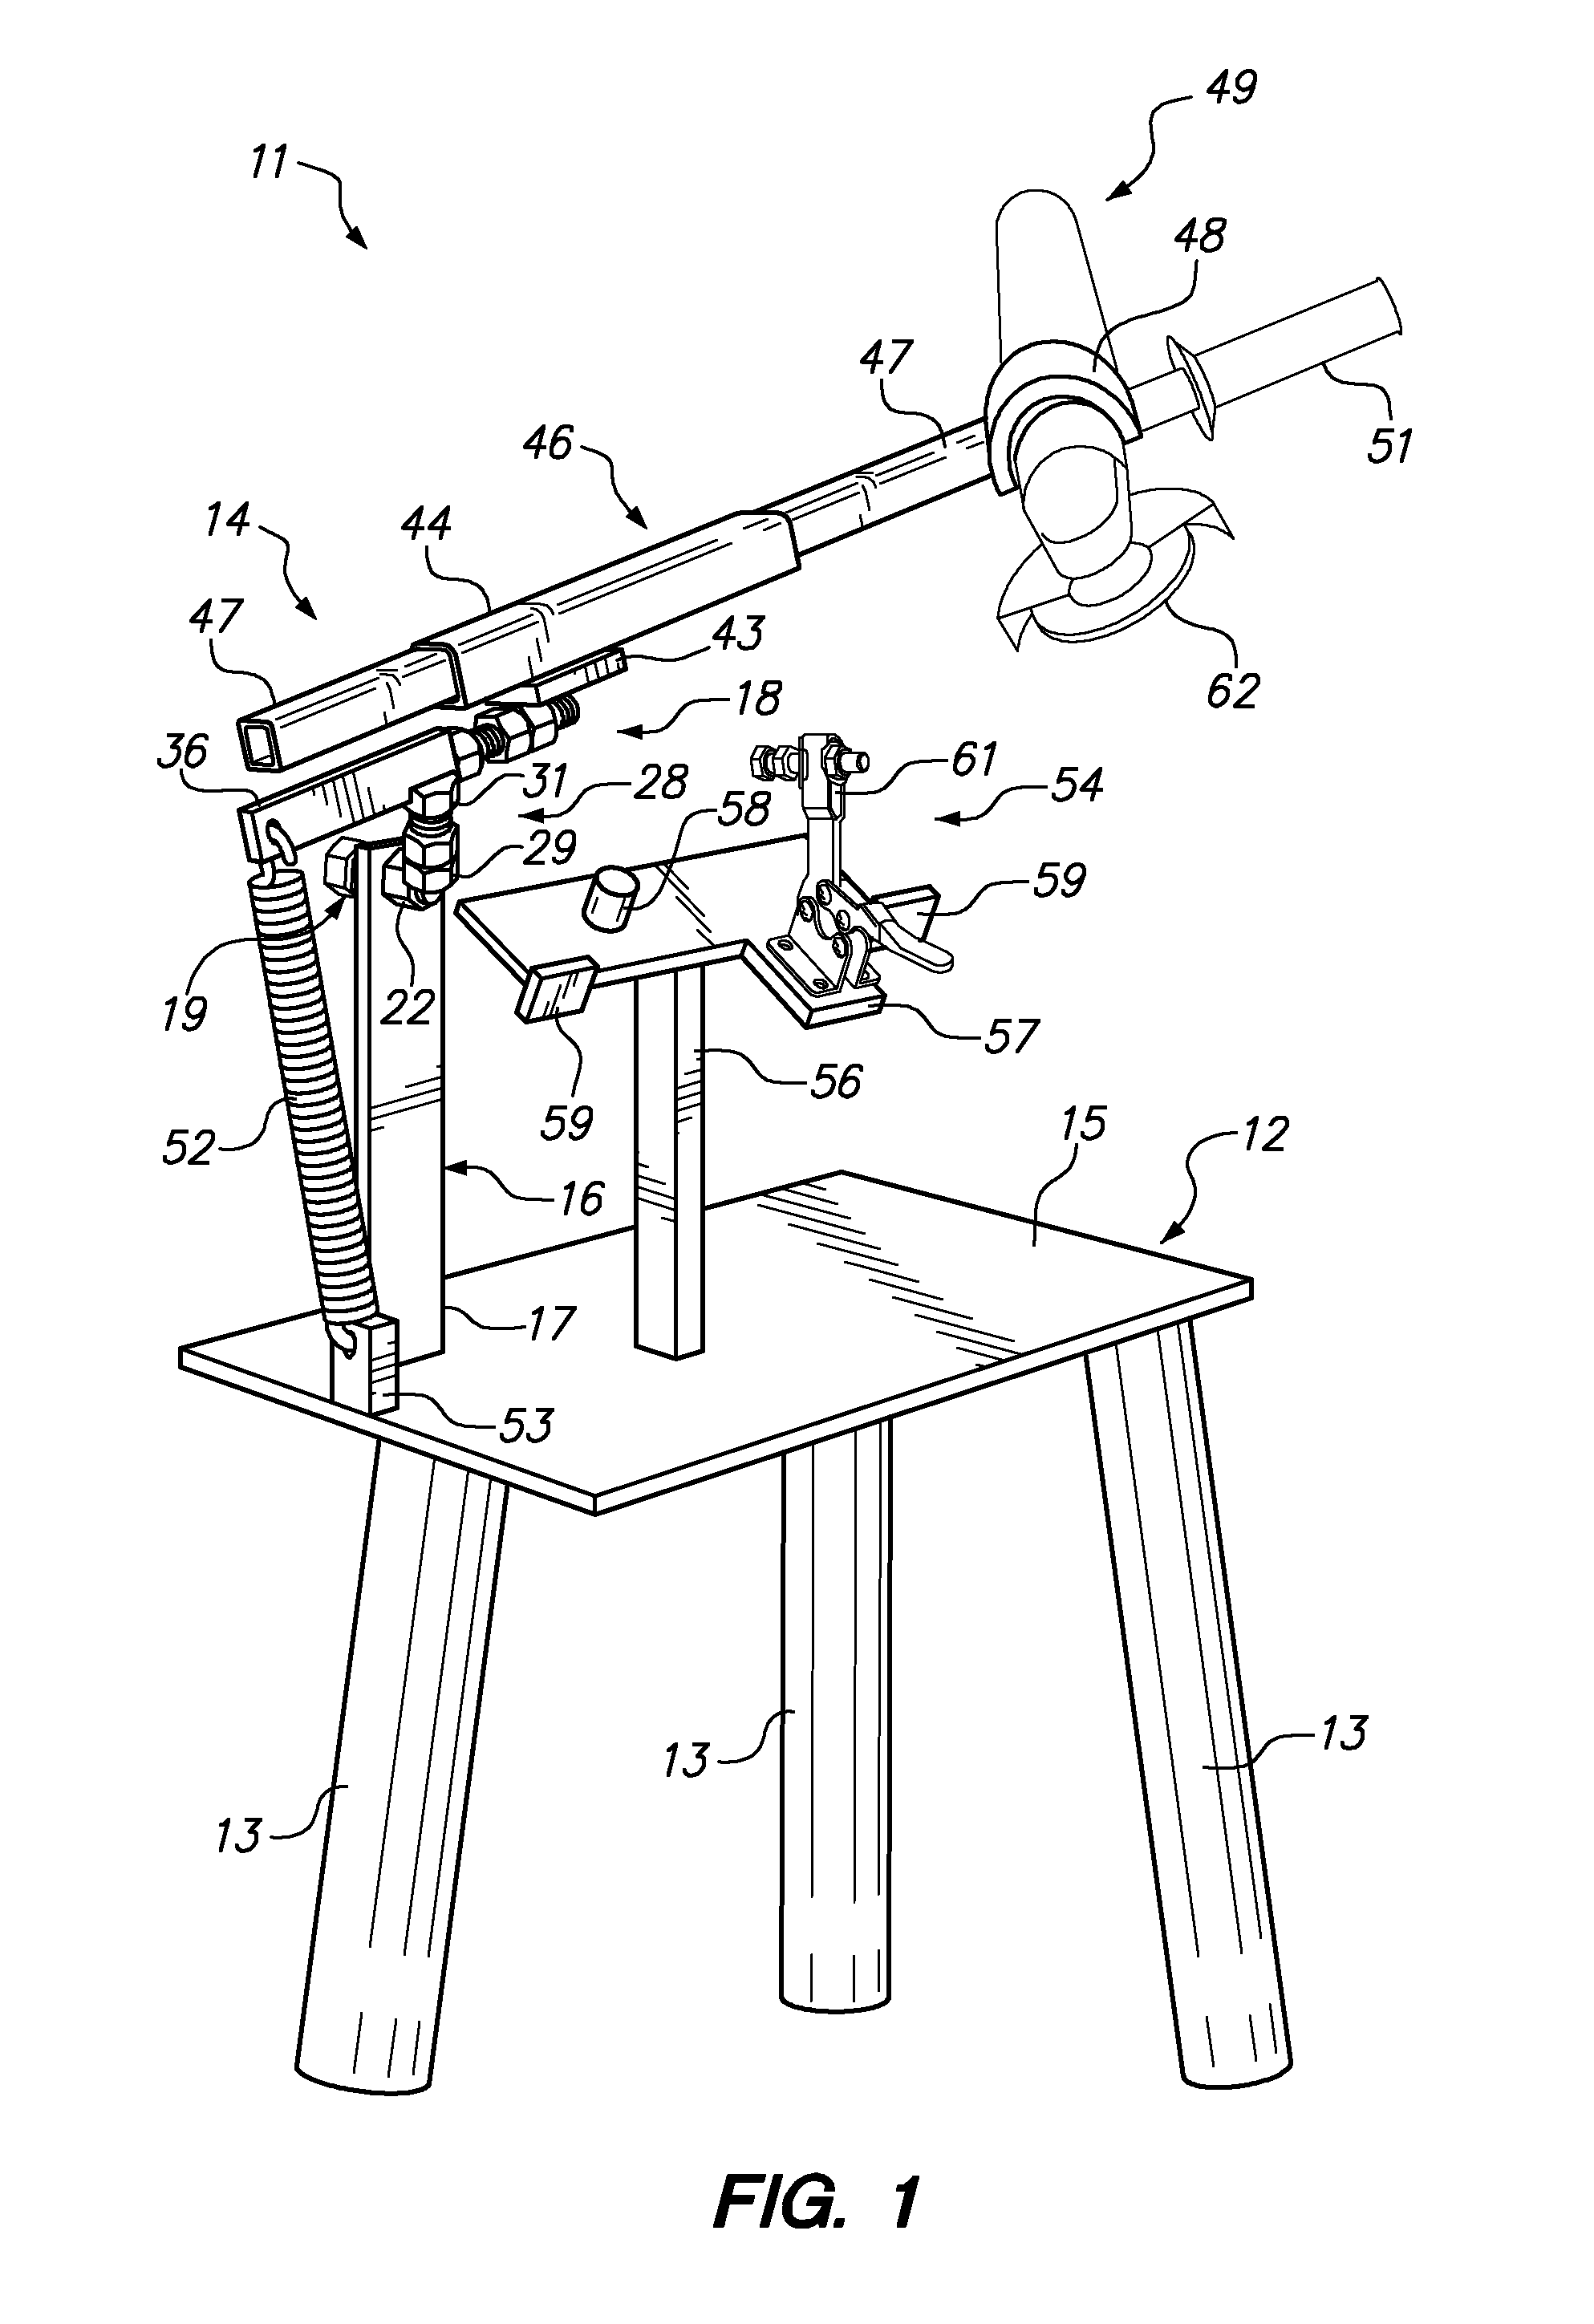 Apparatus for sharpening blades